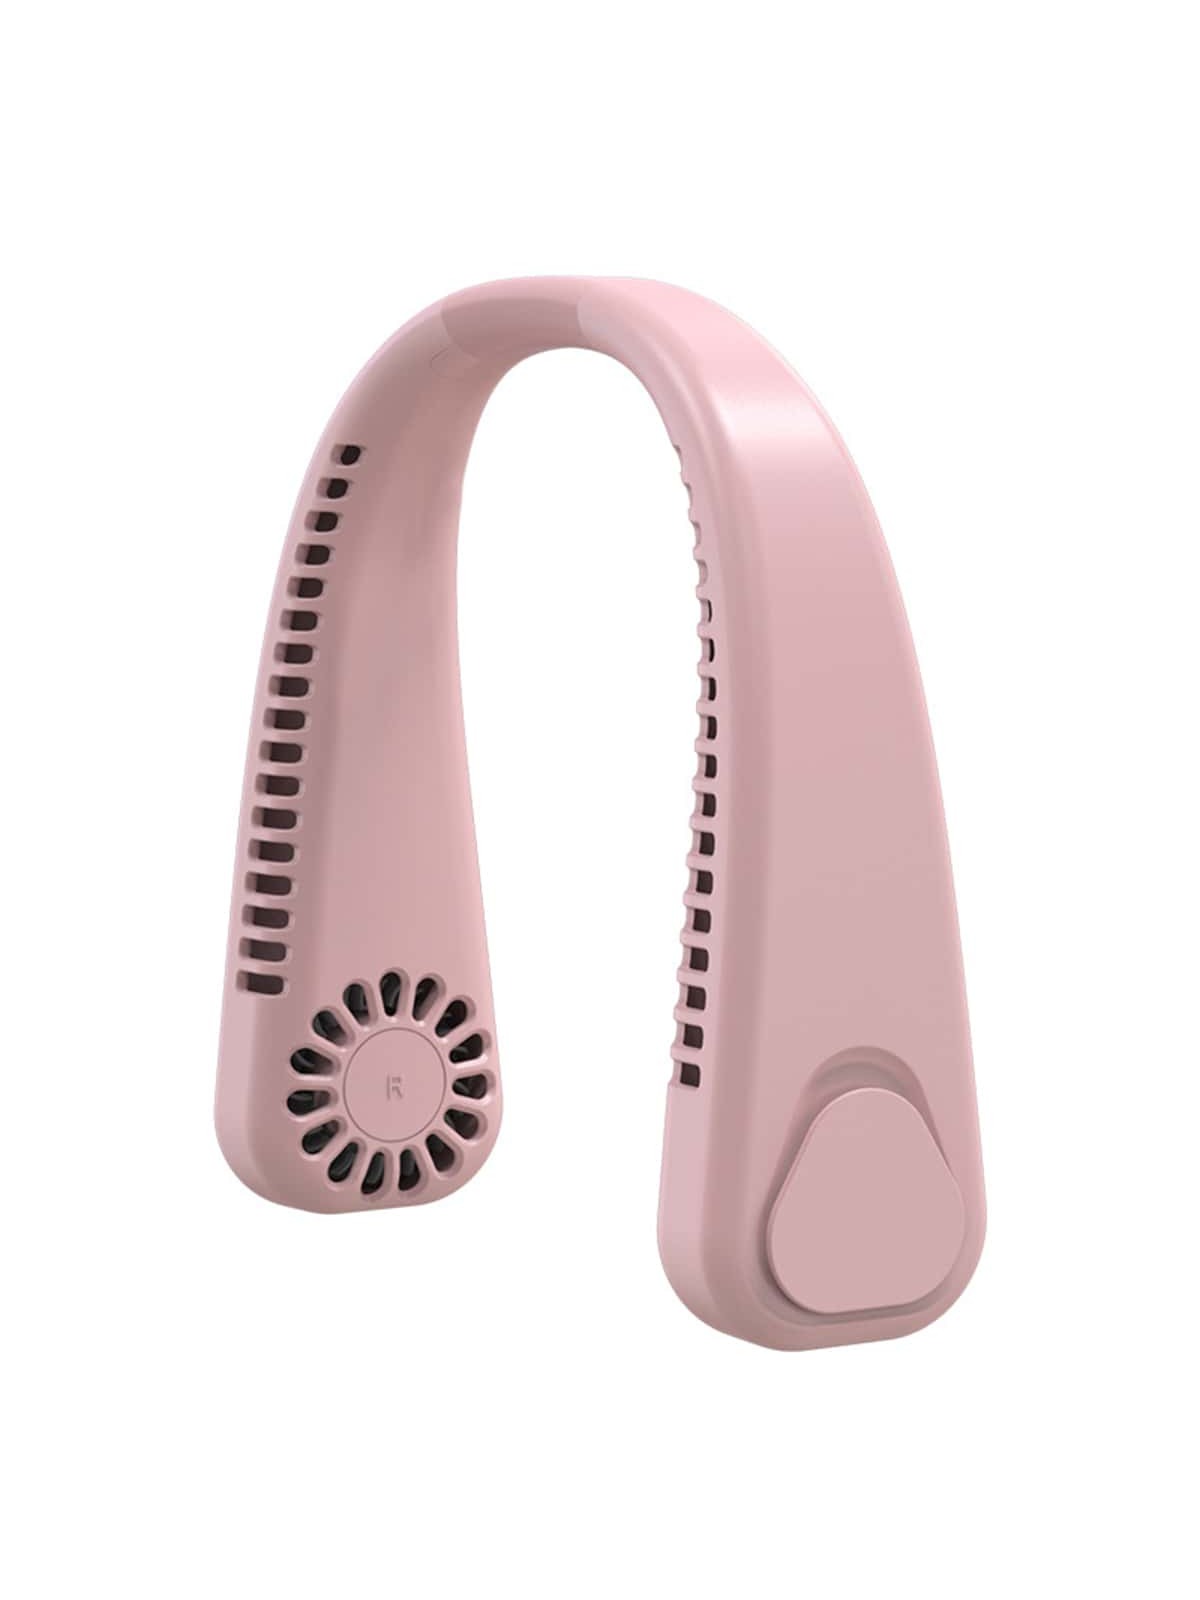 Wearable Rechargeable Neck Fan - An Outdoor Sport Style Without Blade-Pink-1